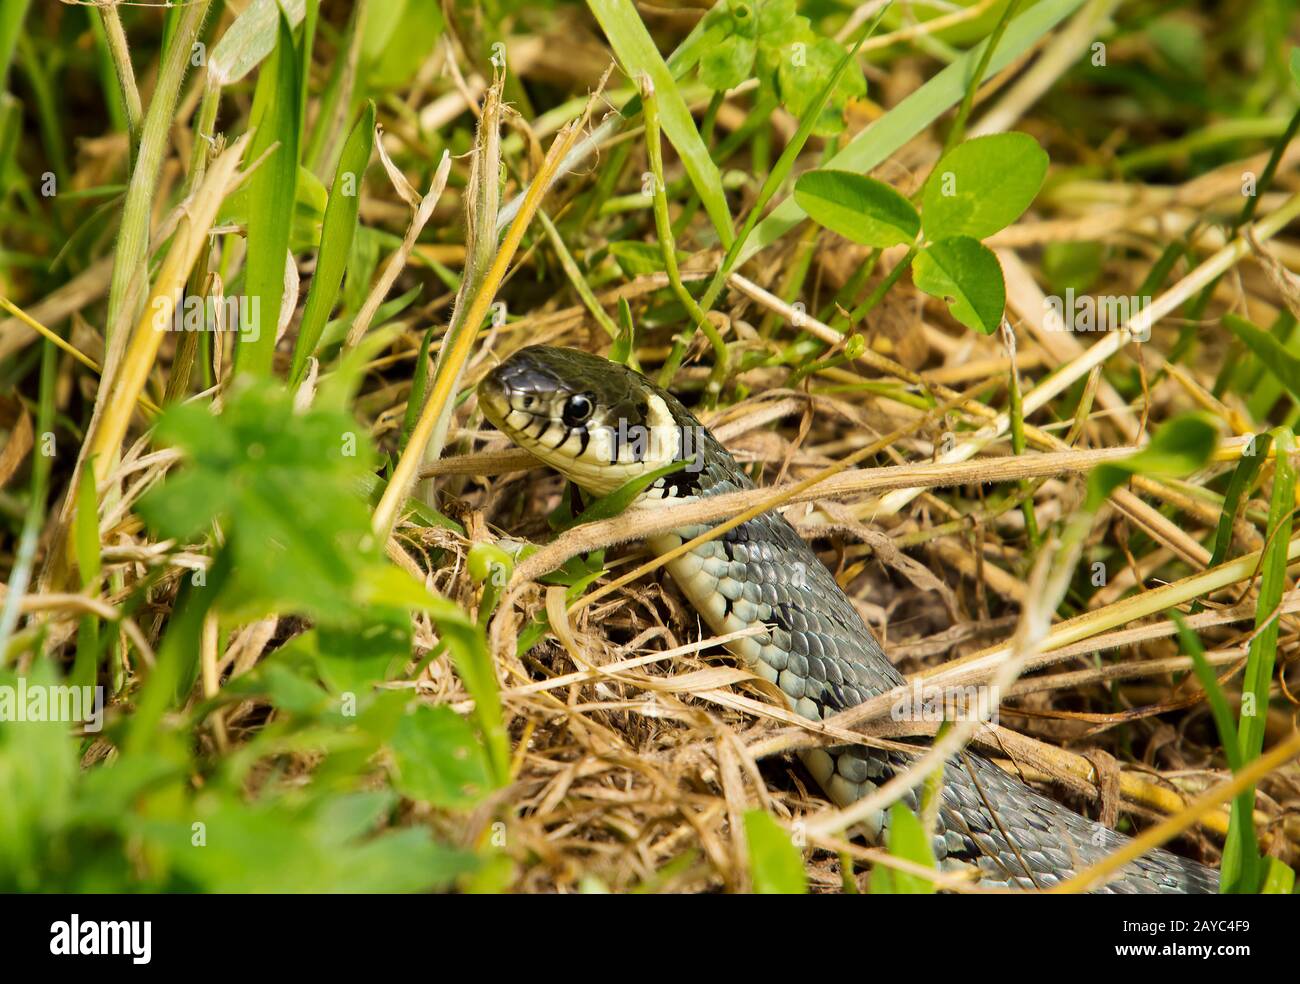 Grass Snake In Wilderness On A Green Meadow It Is A Eurasian Non Venomous Snake Poland Stock Photo Alamy,Etiquette Rules Table Manners